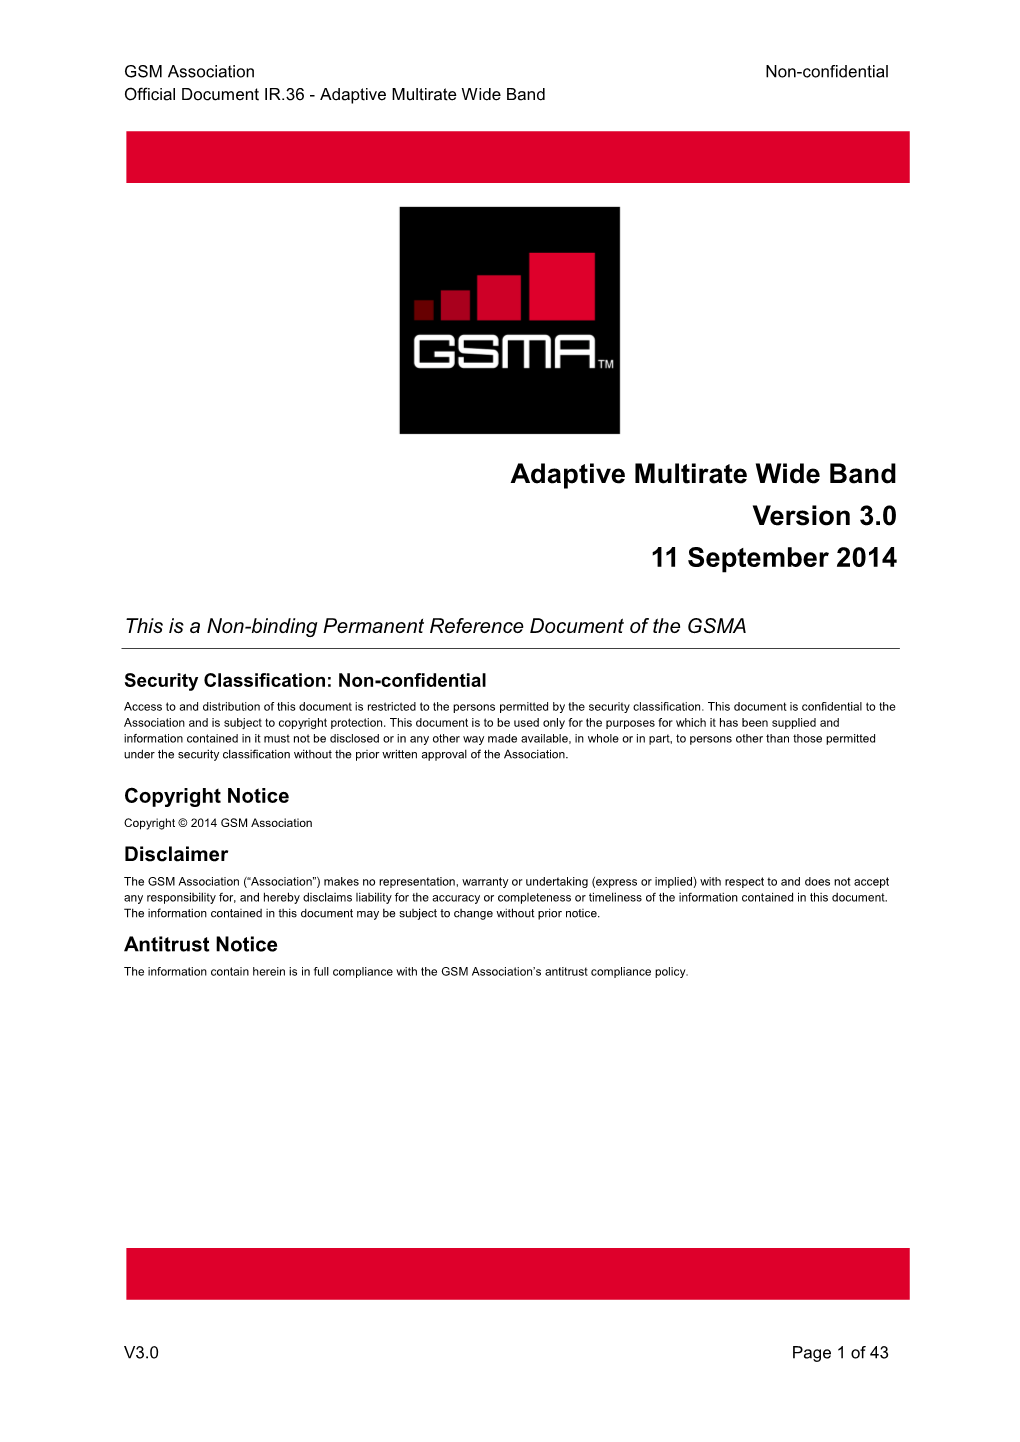 Adaptive Multirate Wide Band Version 3.0 11 September 2014